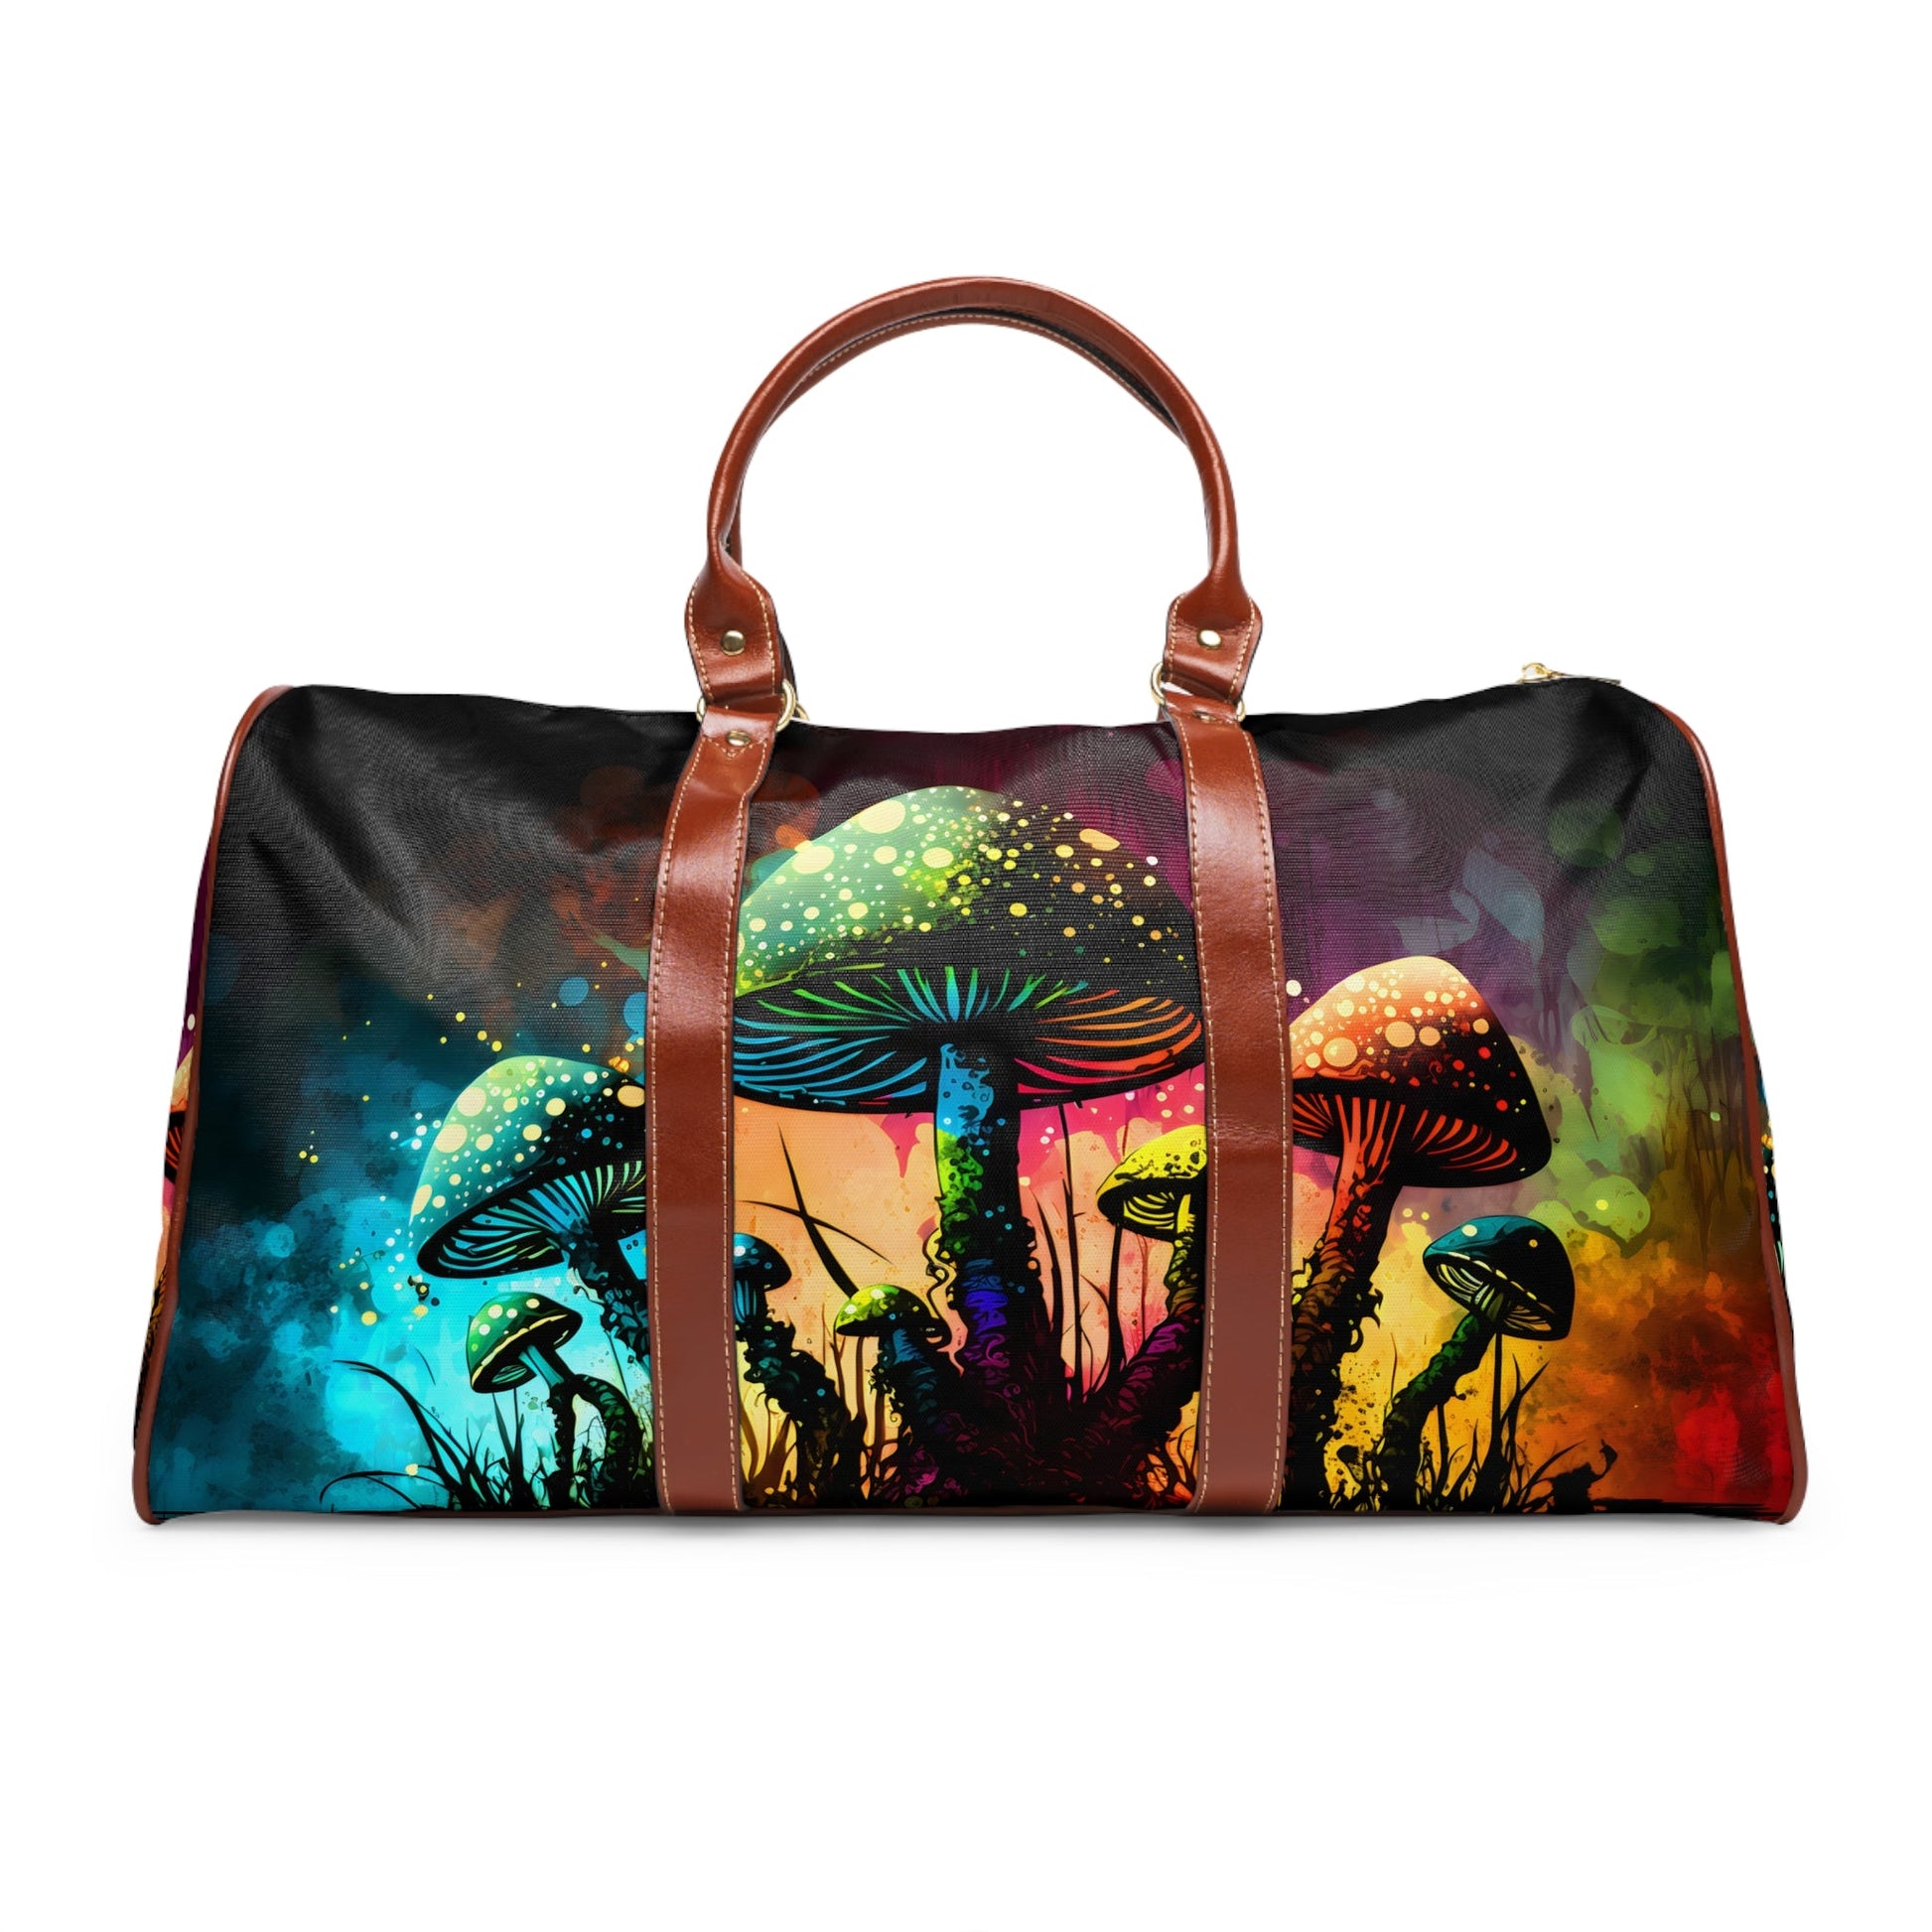 Mushroom Travel Bag - Bigger than most duffle bags, tote bags and even most weekender bags!